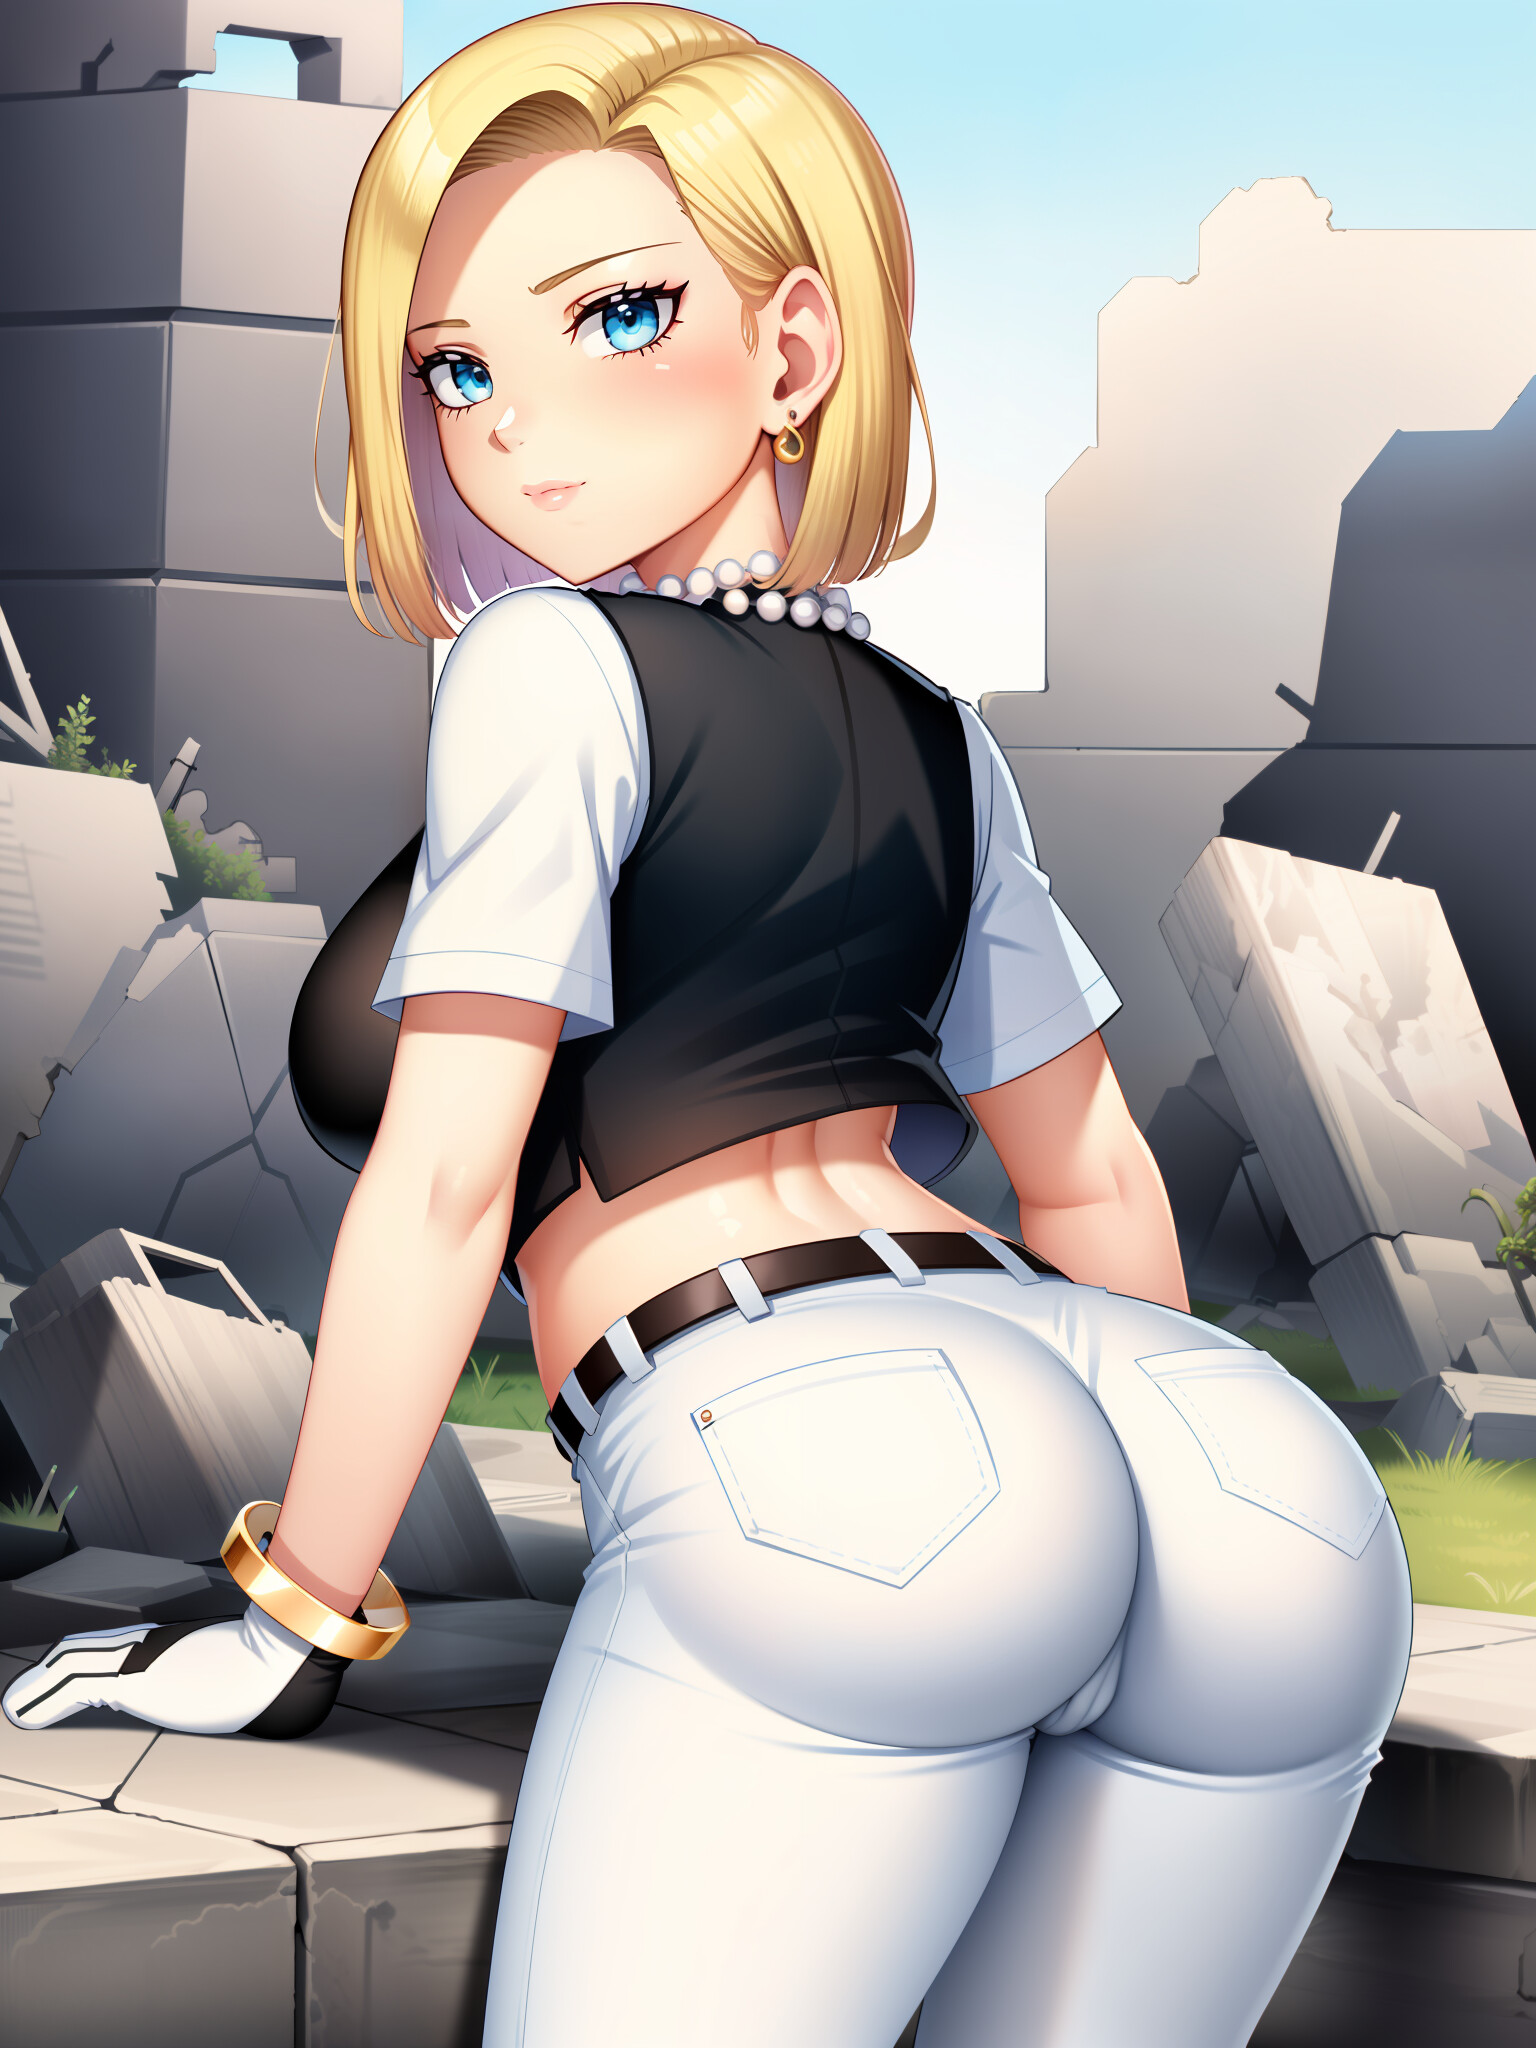 andrew slotnick recommends dbz android 18 sexy pic